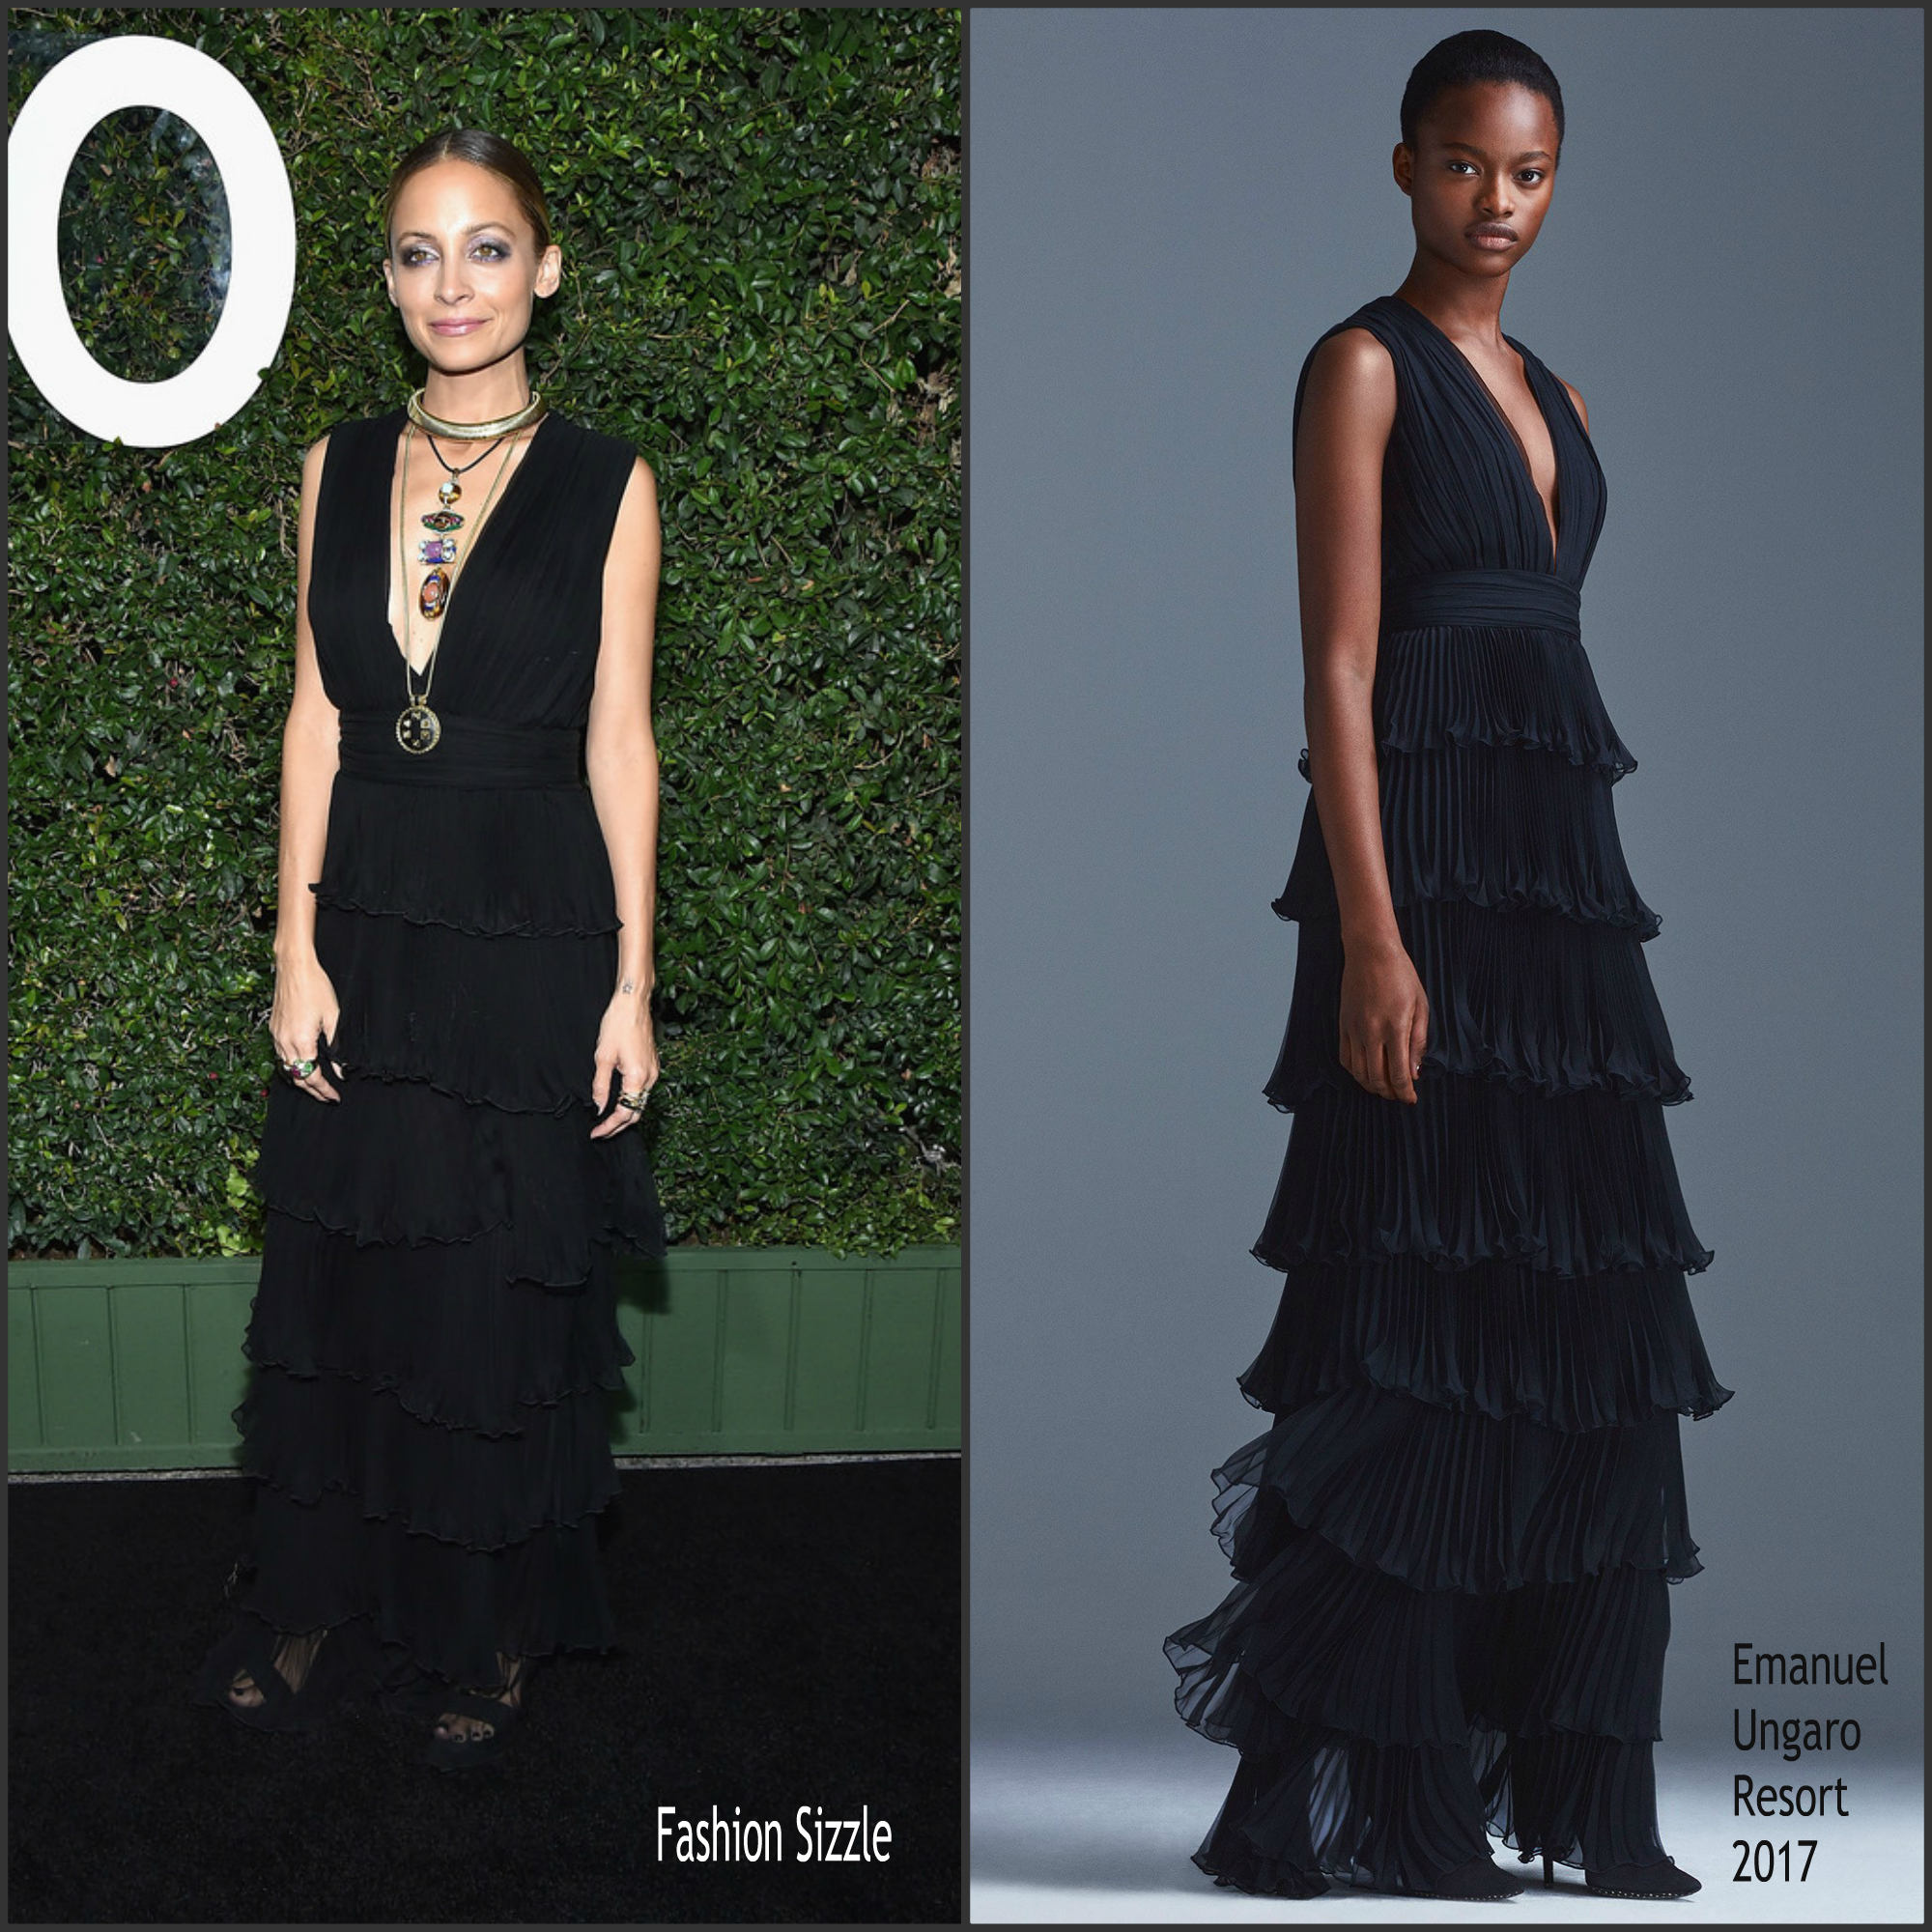 nicole-riche-in-emanuel-ungaro-at-who-what-wear-10th-anniversary